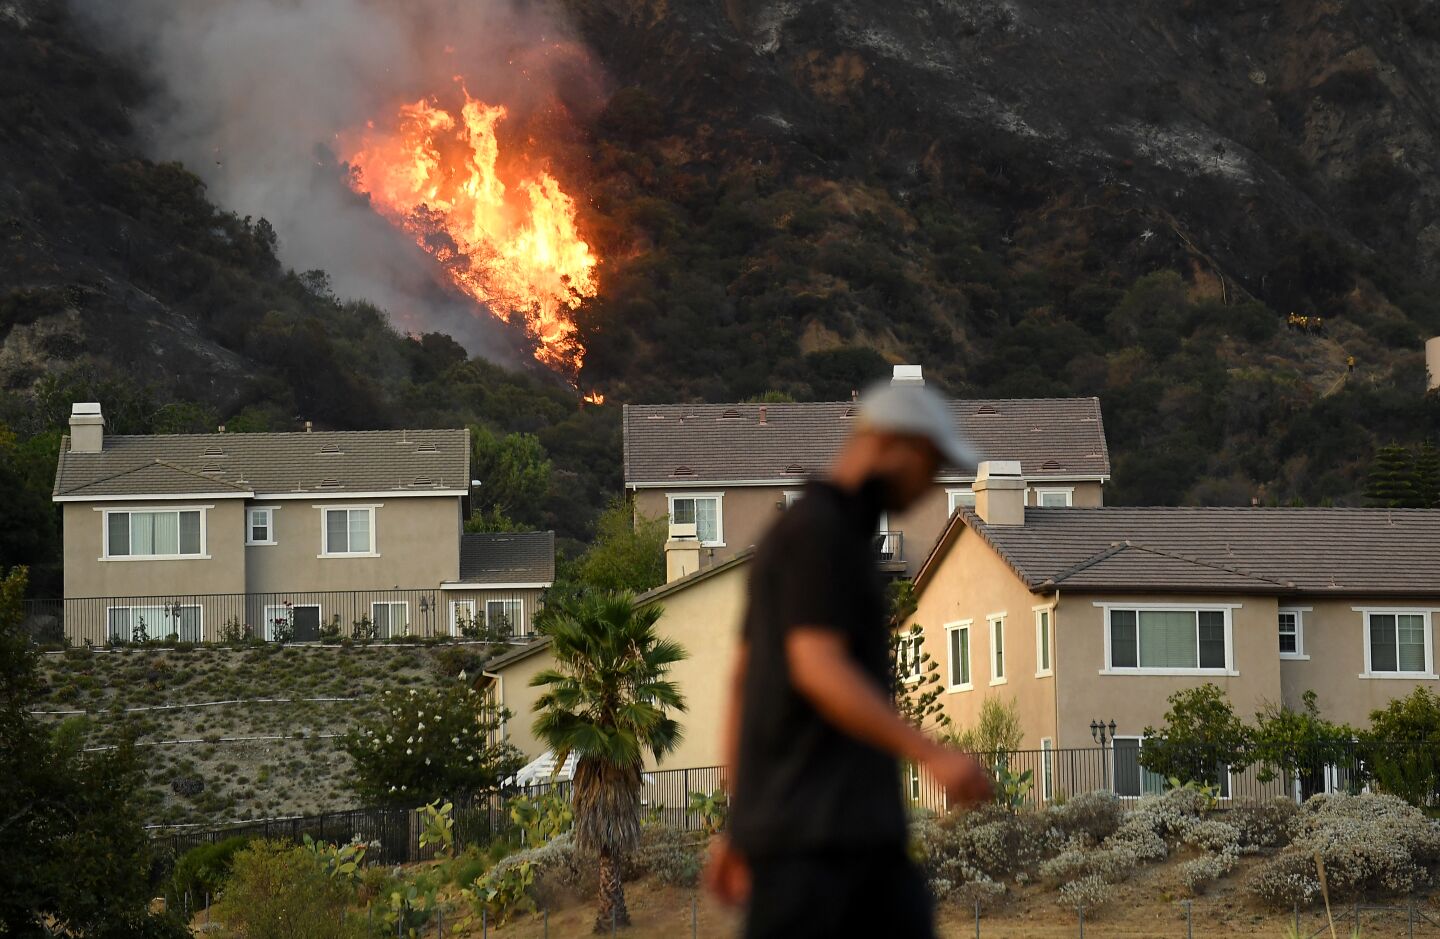 A man walks by as flames burn in the hills above a cluster of homes